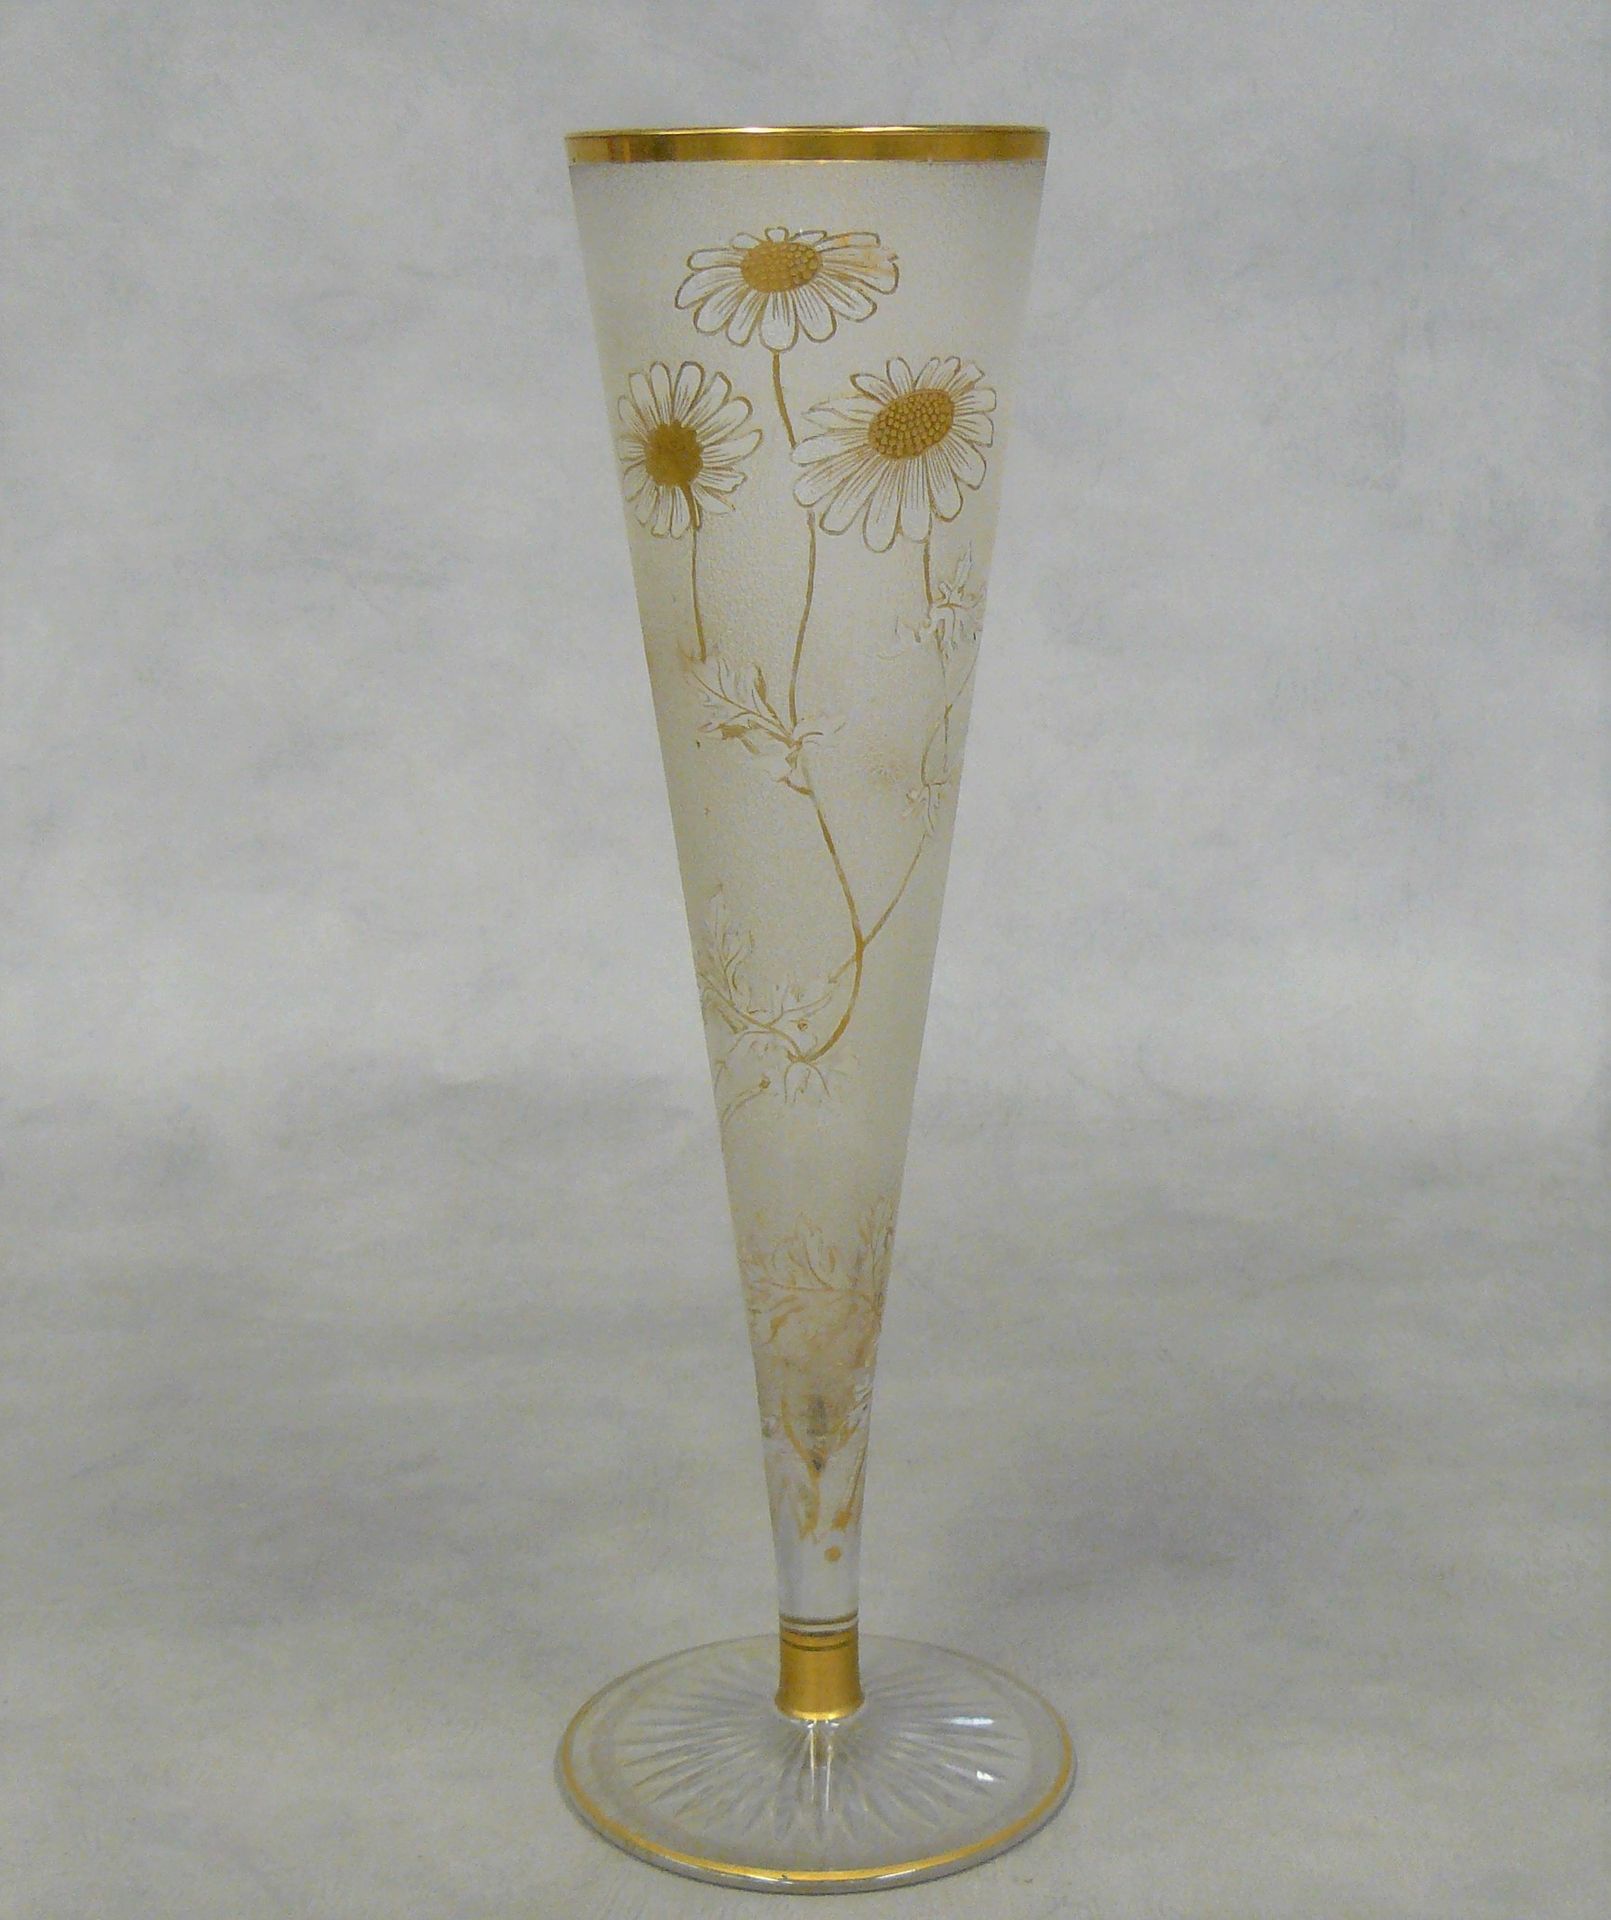 Null conical vase in frosted glass with gold floral decoration - H 35 cm